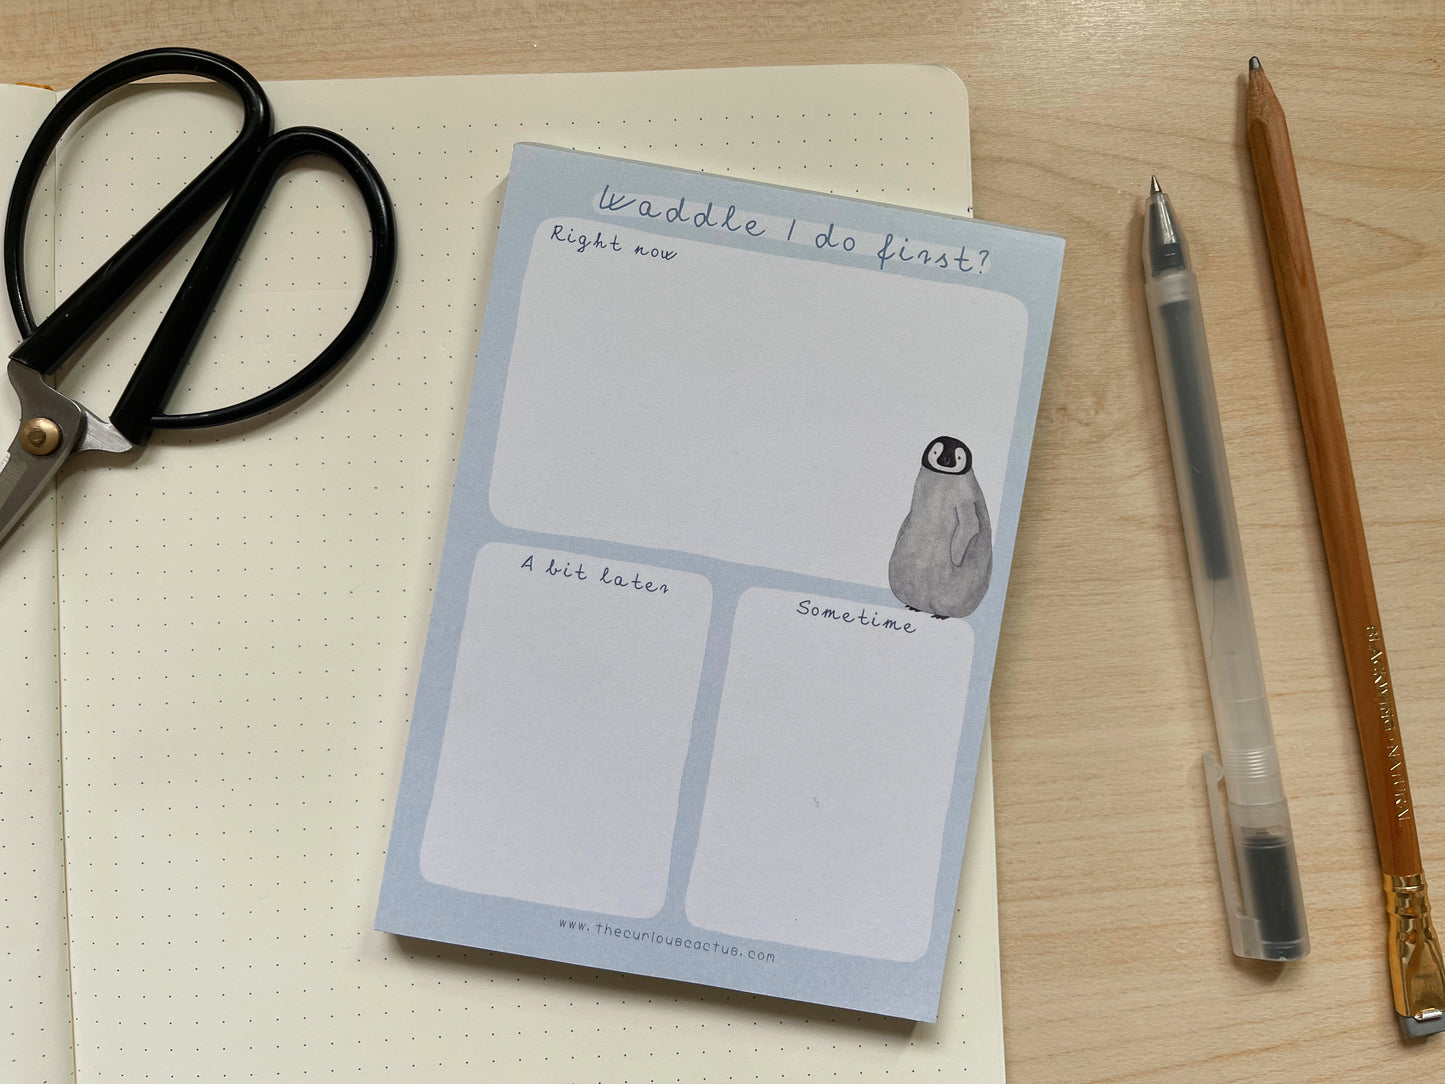 Waddle I do first? A6 Notepad